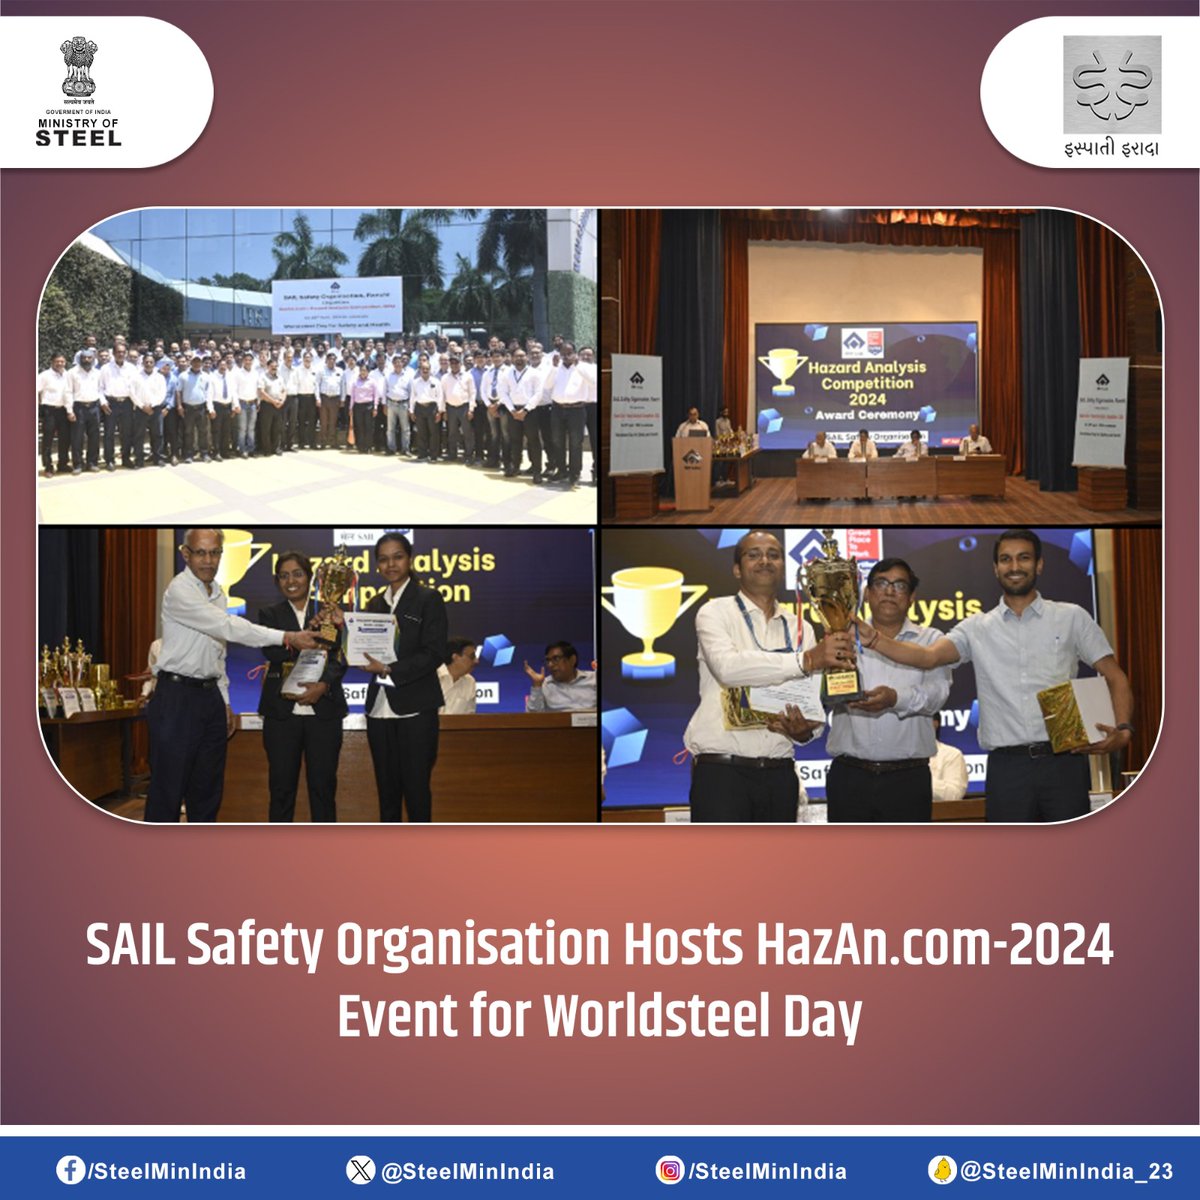 #SSO's HazAn.com-2024 event celebrates Worldsteel Day for Safety and Health at the forefront!🚨 27 #SAIL teams joined the competition at MTI, Ranchi.

#SafetyFirst #WorldsteelDay